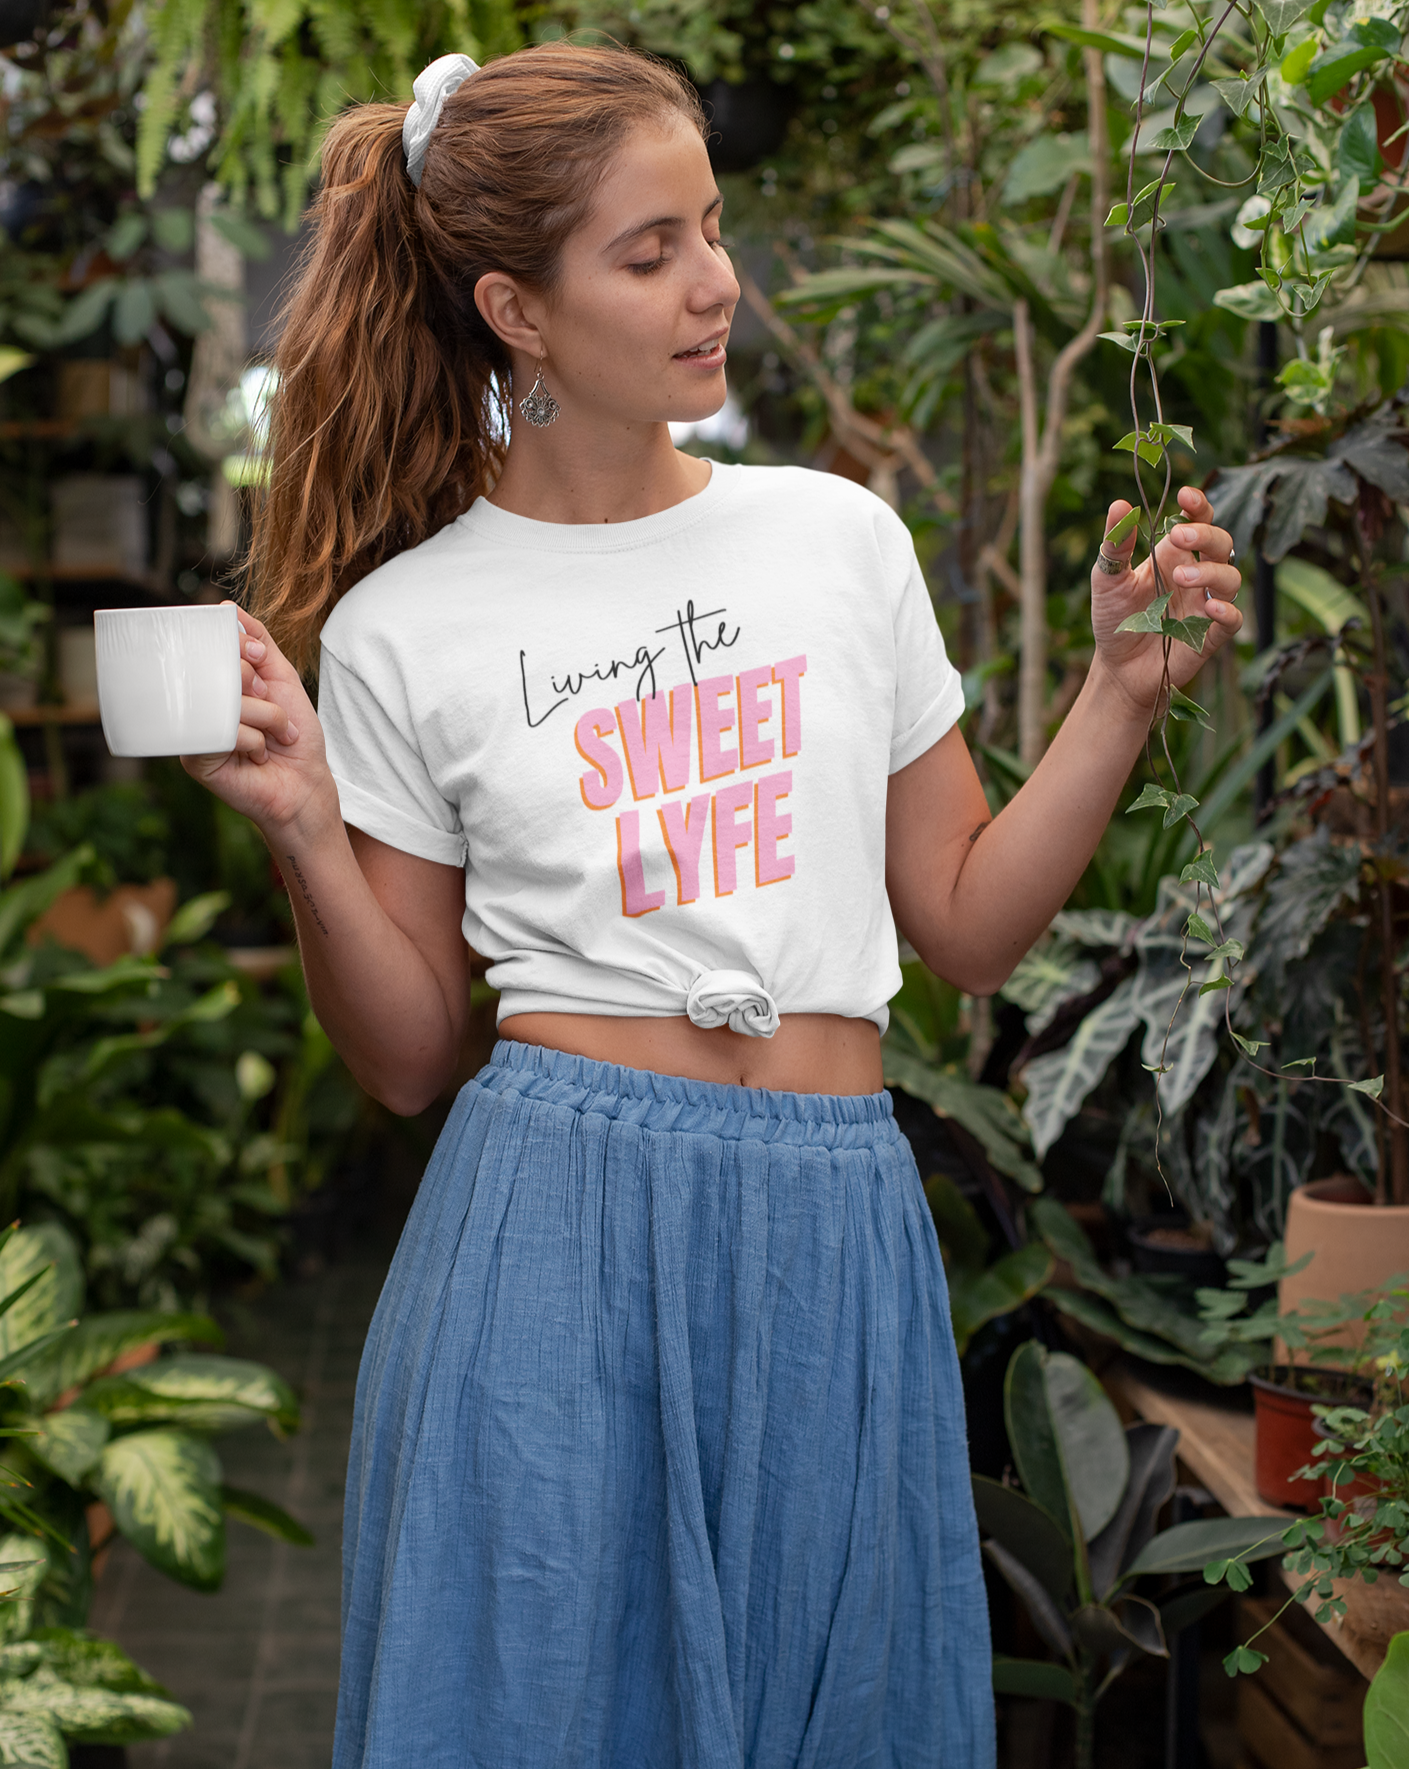 Living the sweet lyfe in a sunny state of mind.  This cotton t-shirt gives off girly vibes.  With light pink lettering, you can make your outfit pop and show off your trendy side at the same time.  Put on this t-shirt and let the compliments roll in and keep the good times going.